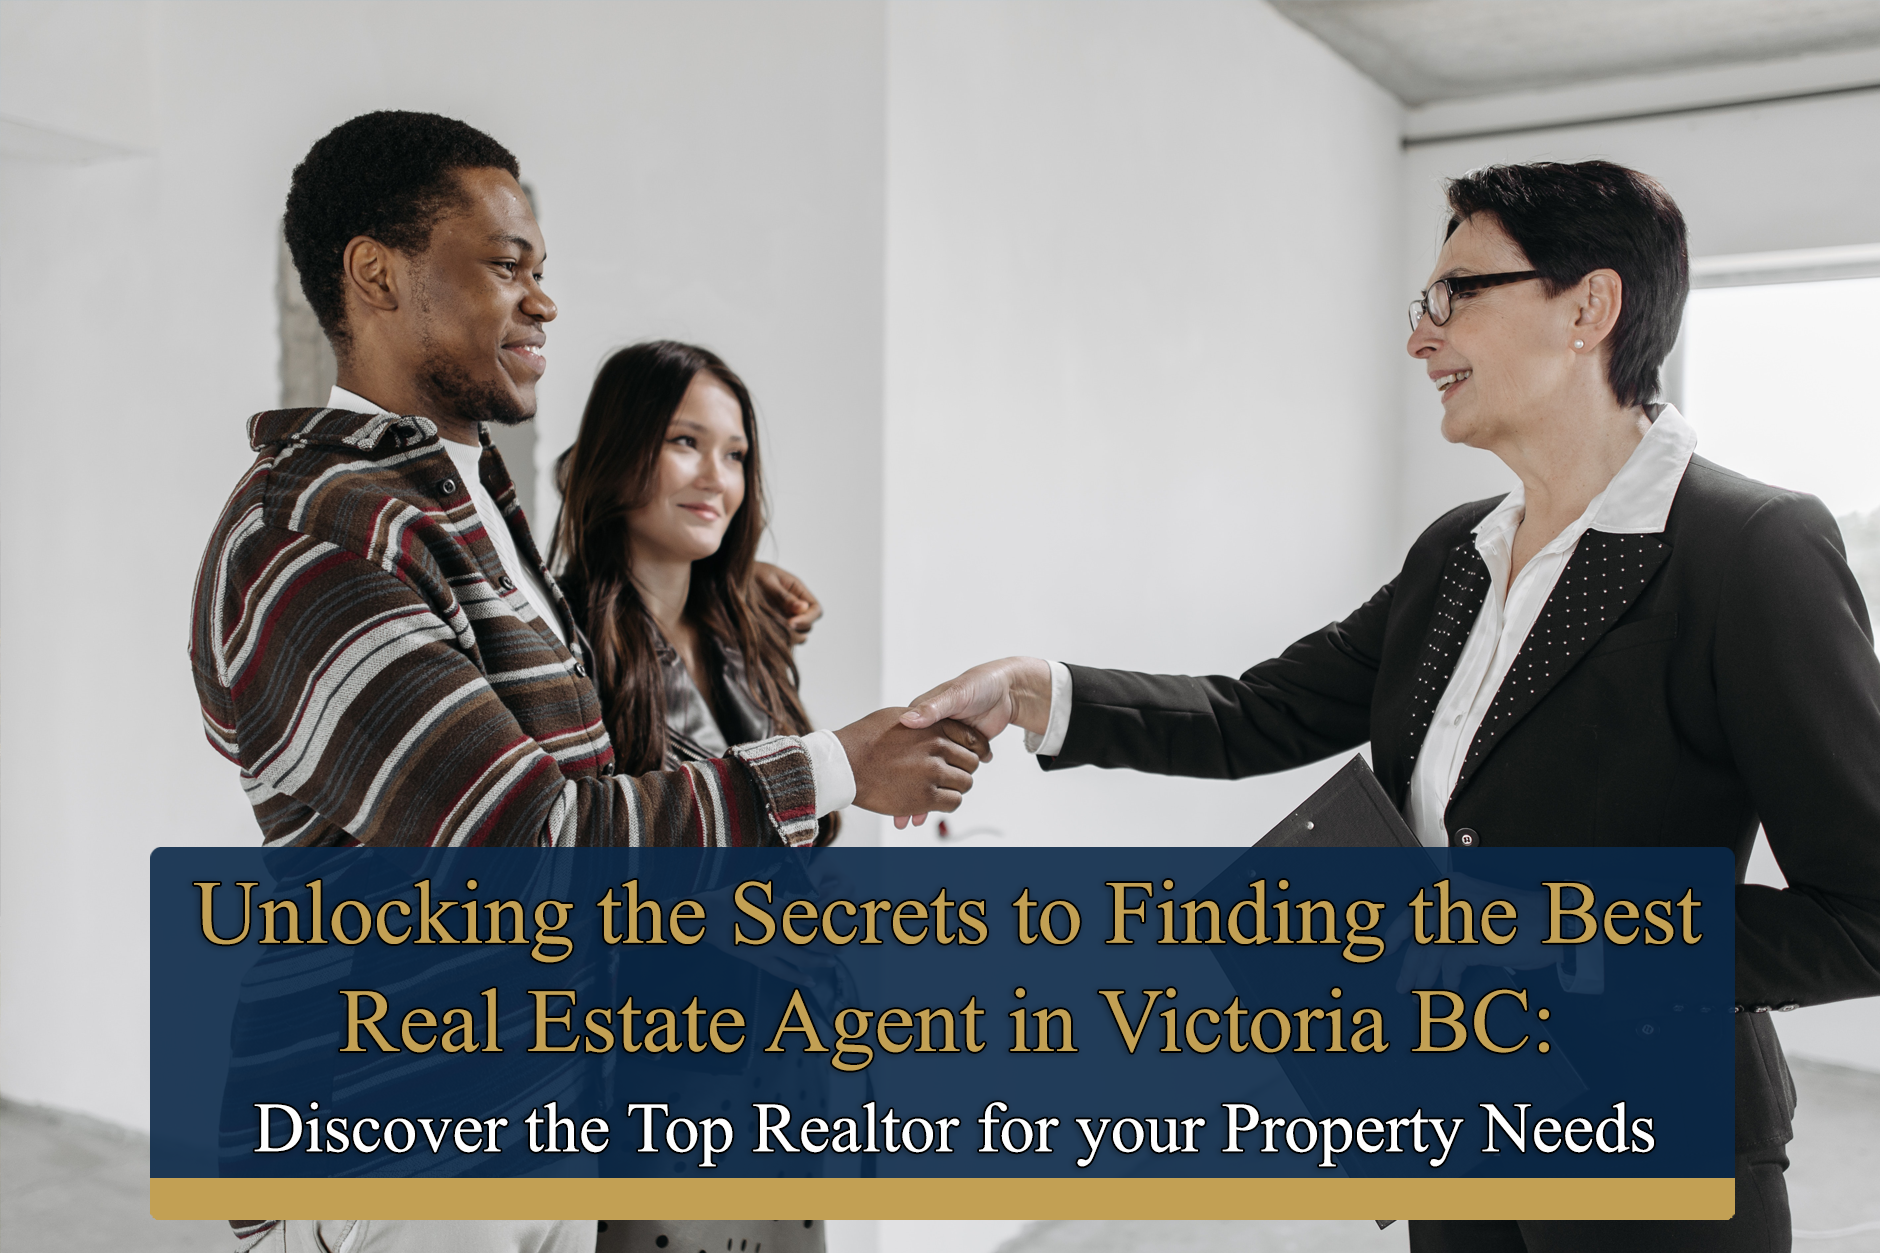 The Secret to Finding the Best Real Estate Agent